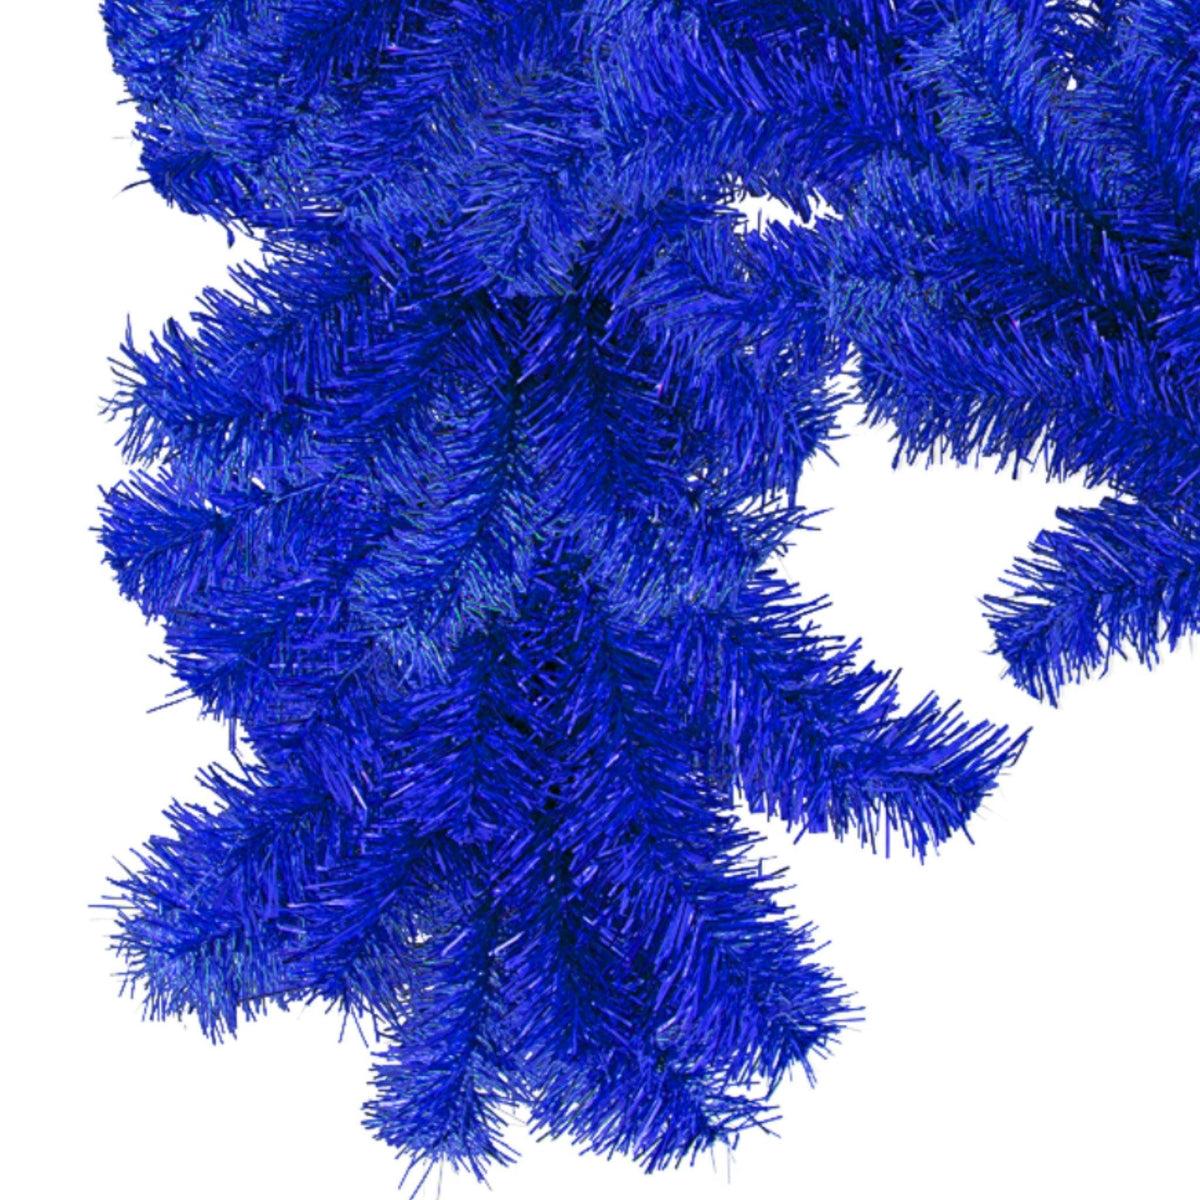 Lee Display's brand new 6FT Blue Tinsel Christmas Garlands on sale at leedisplay.com.  End of the top